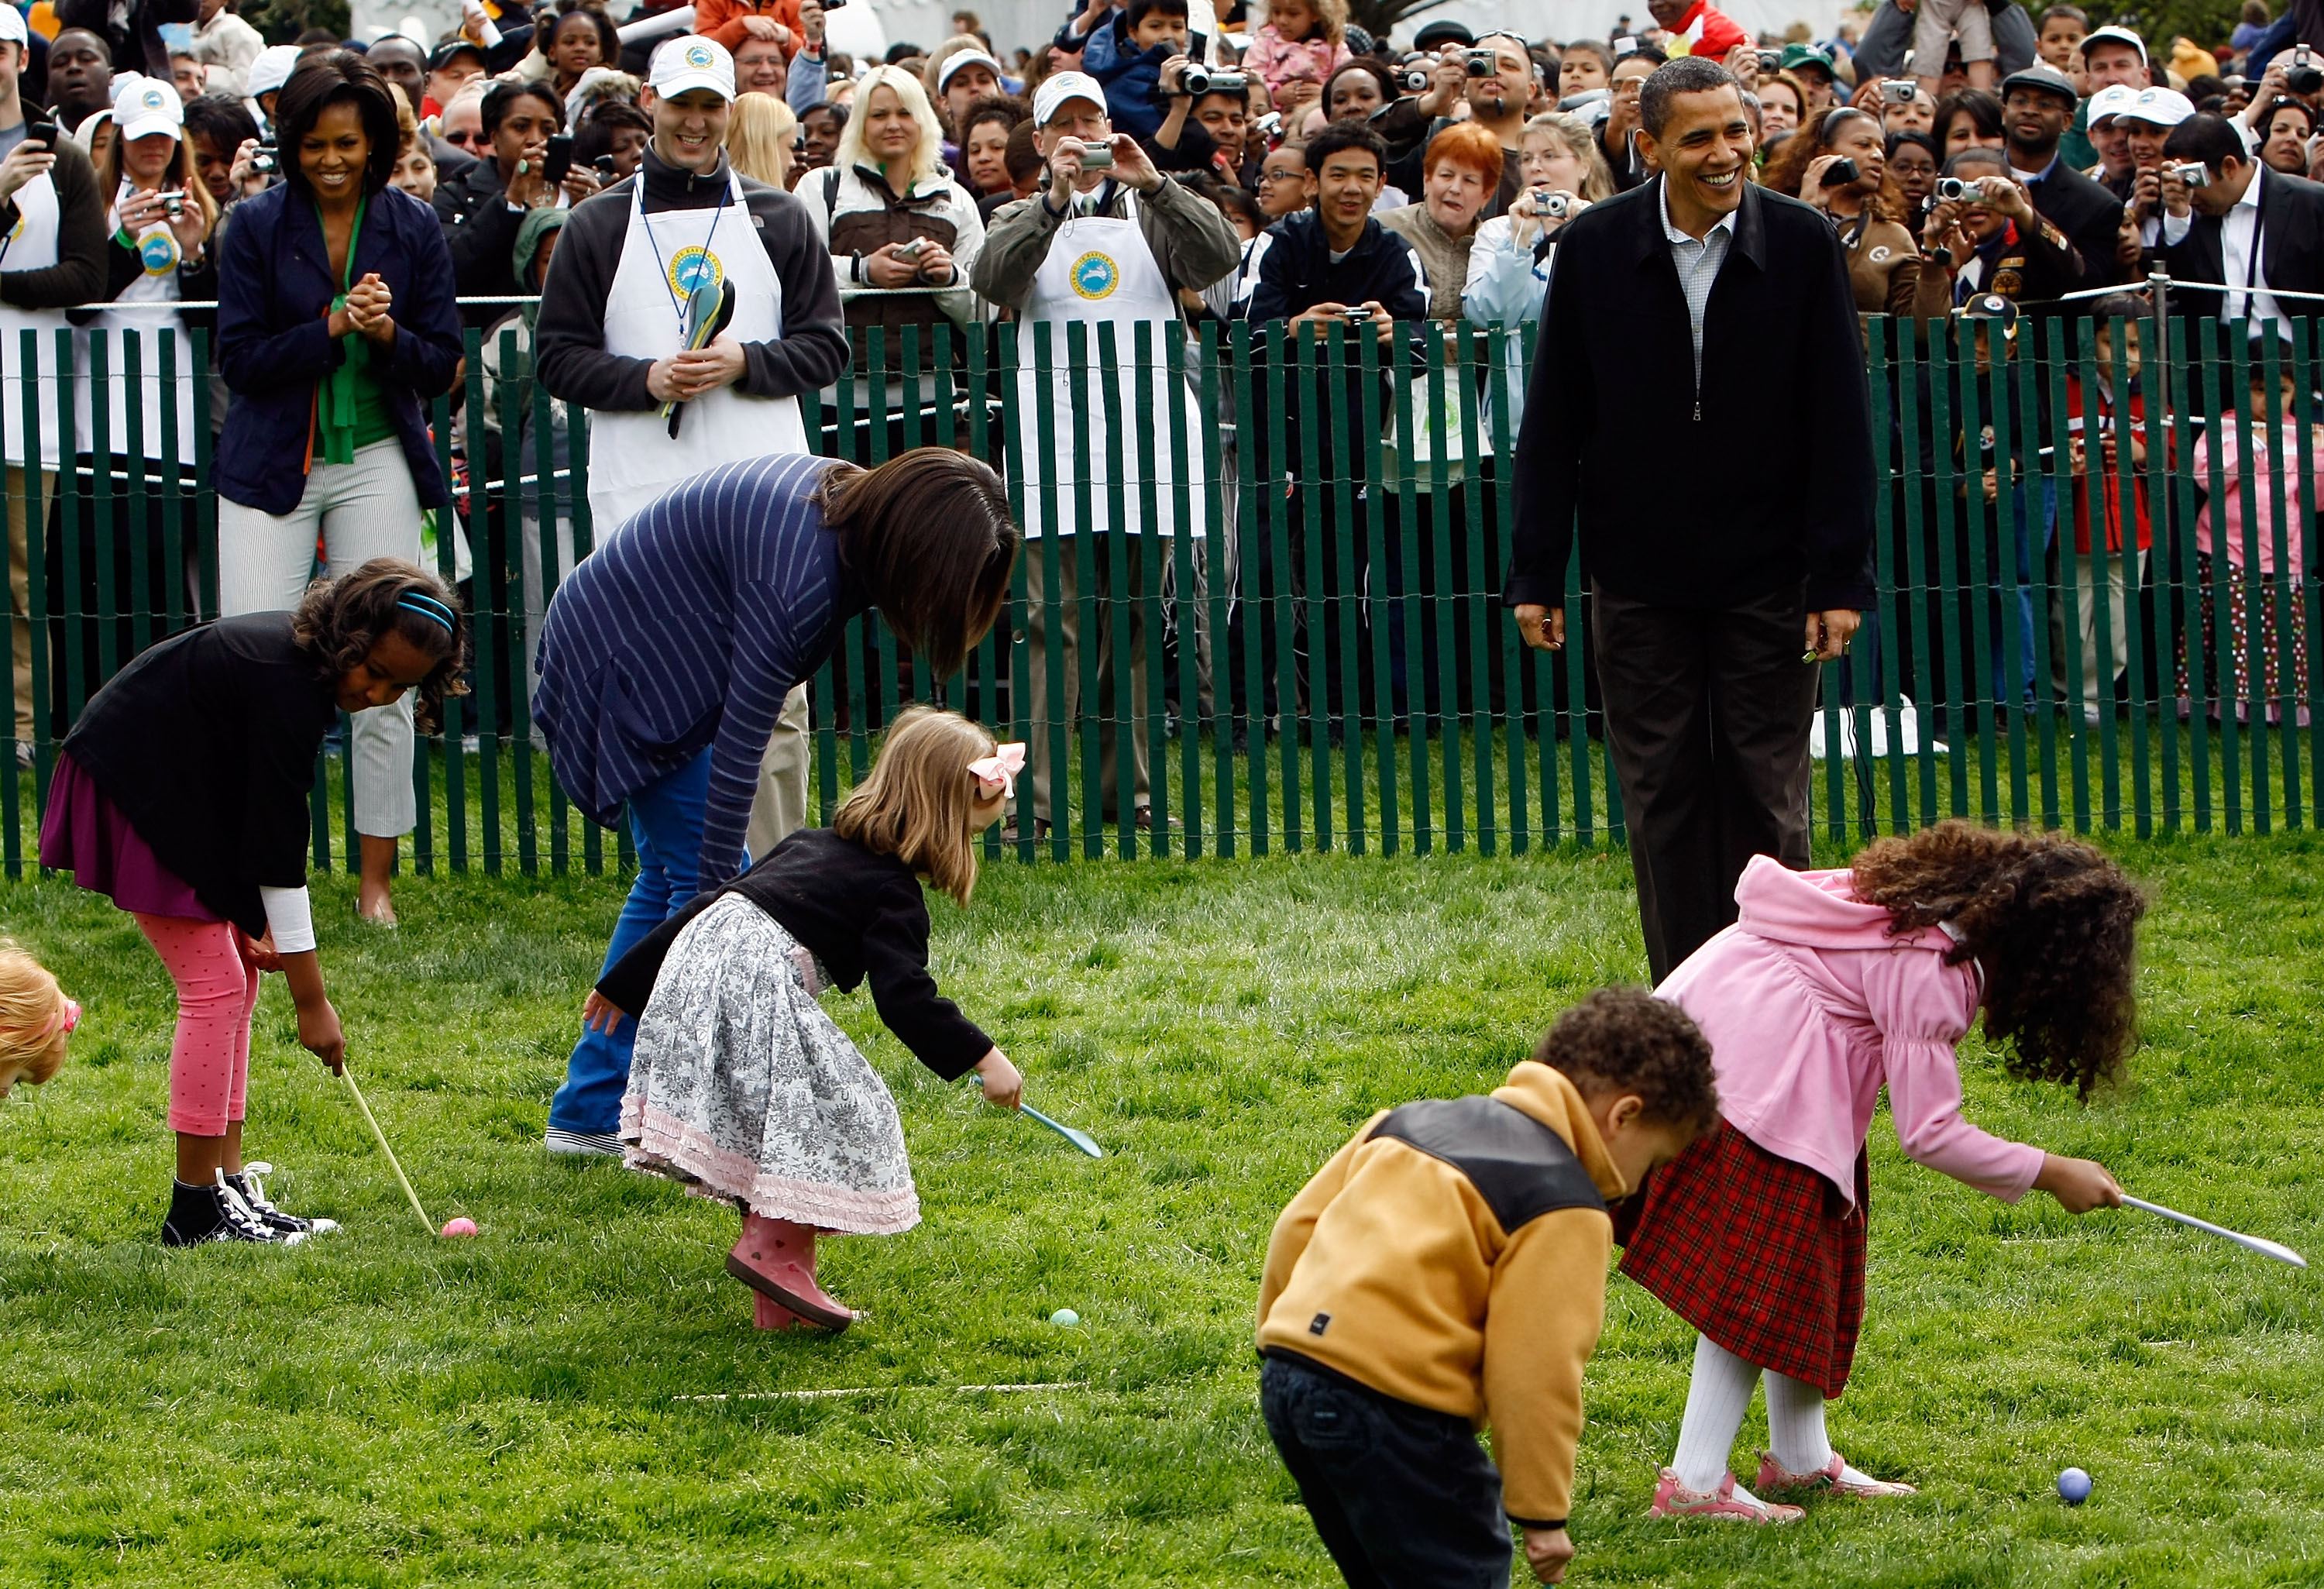 Barack Obama watched children participating in the Annual Easter Egg Roll